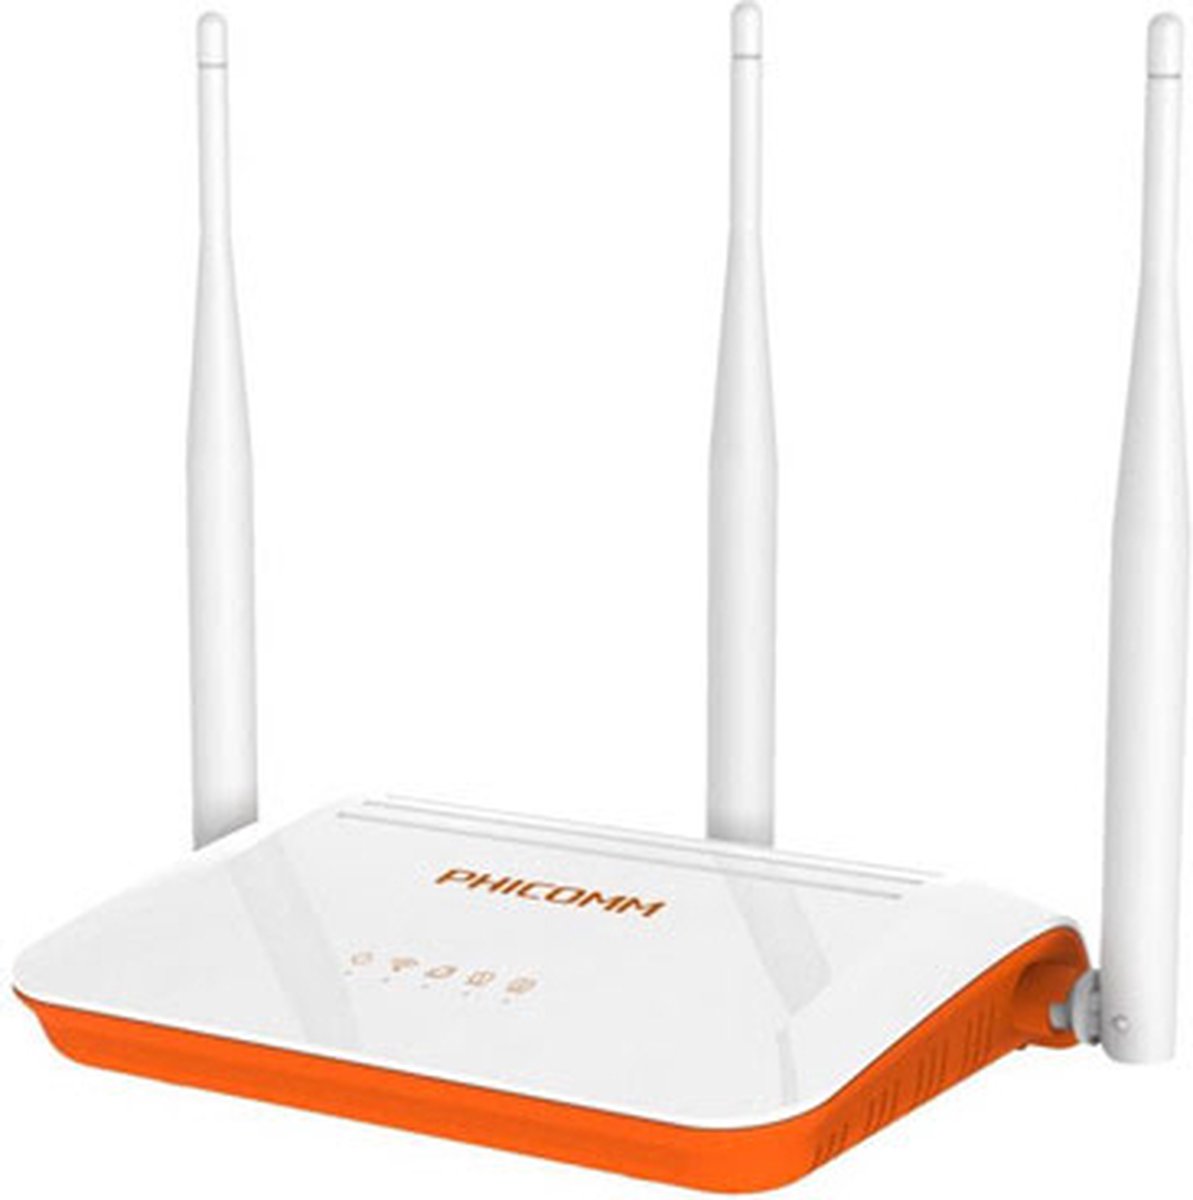 Draadloze Router – Phicomm – 300 Mbps – Wit